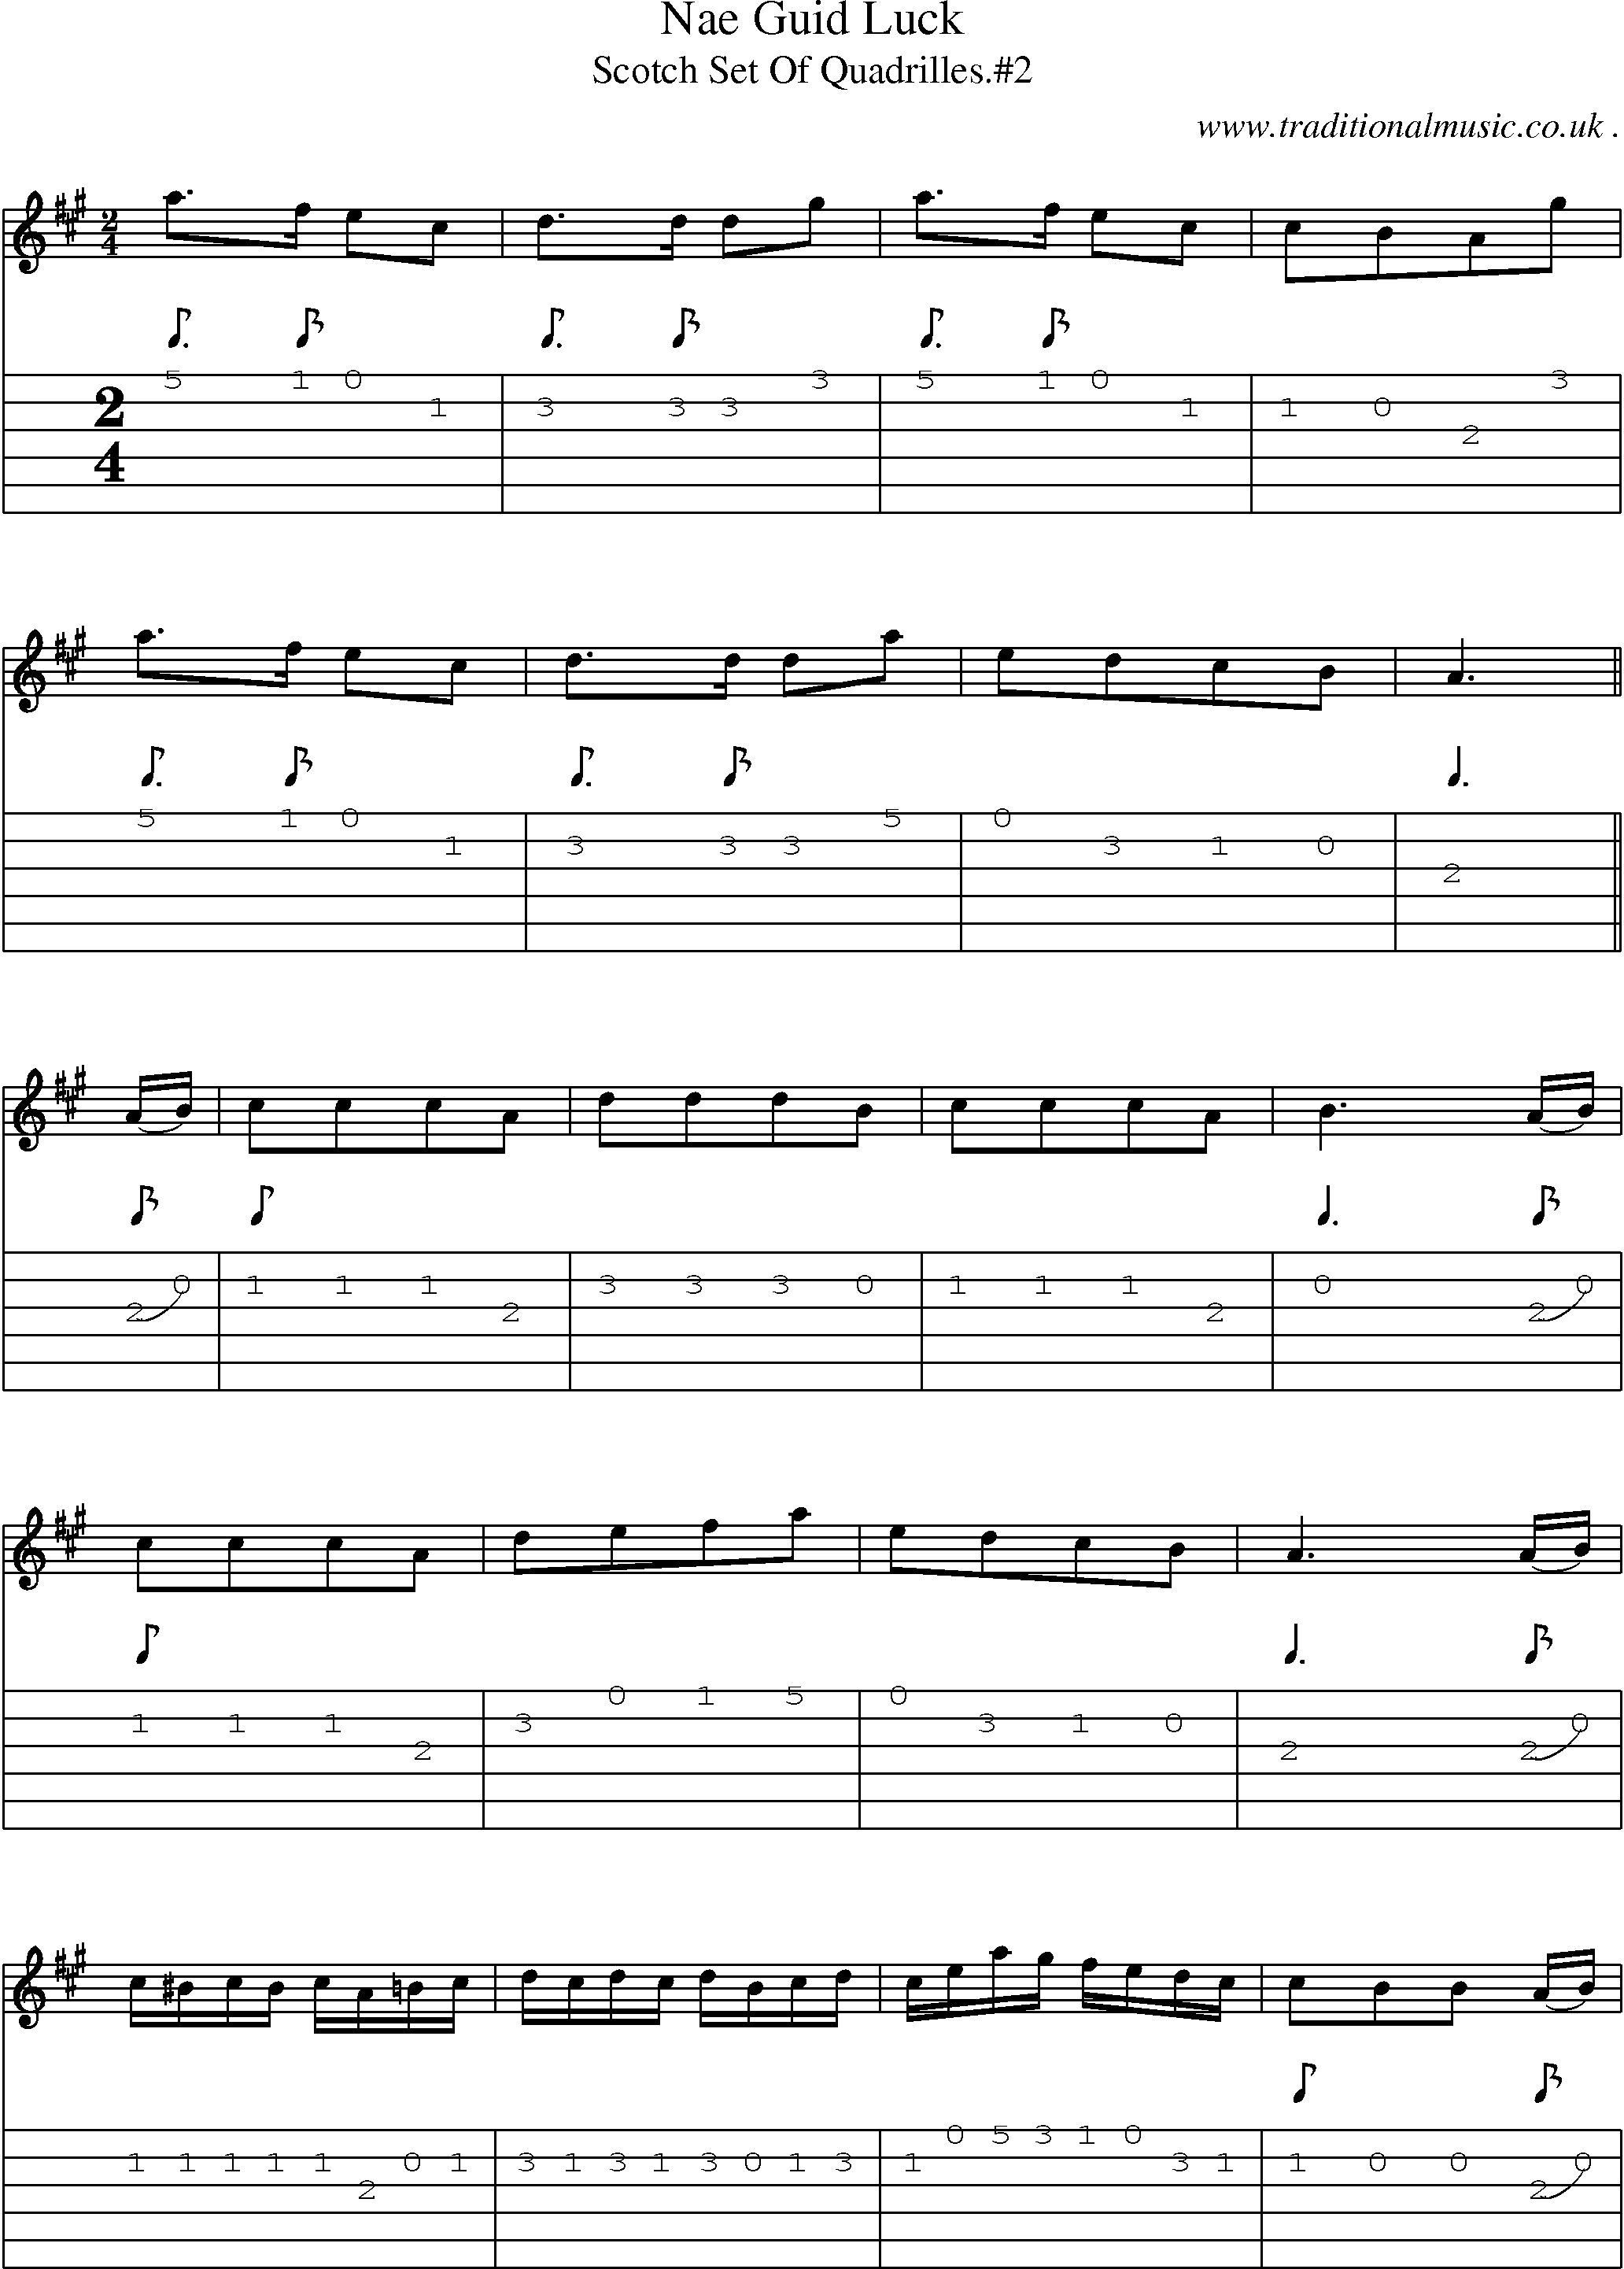 Sheet-Music and Guitar Tabs for Nae Guid Luck